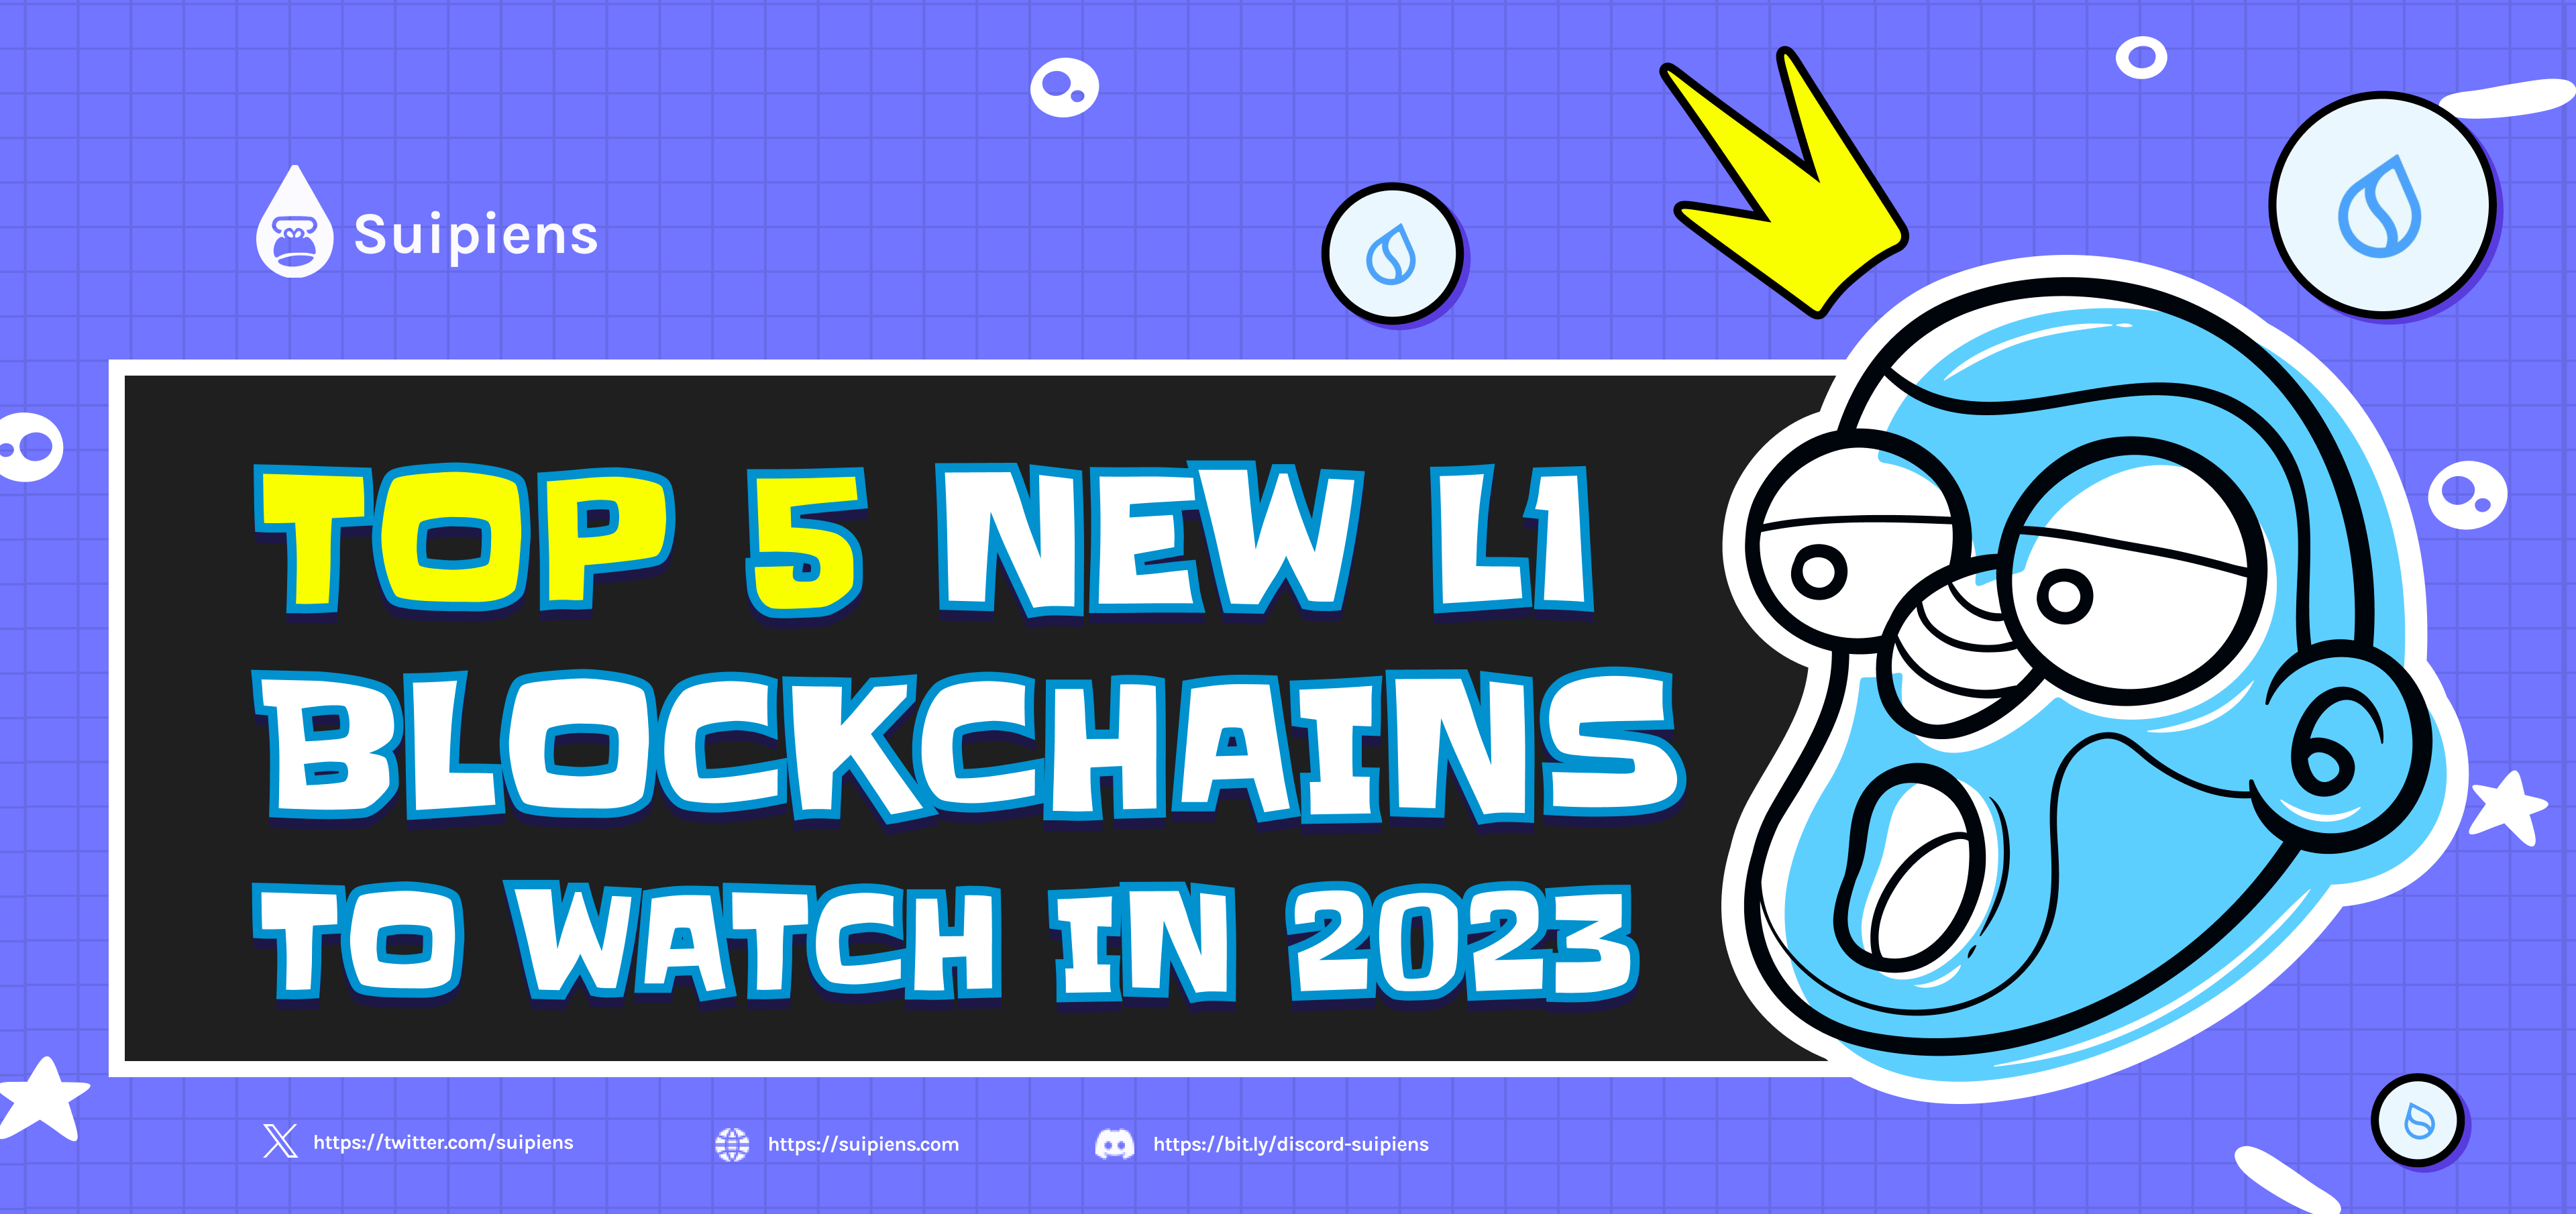 Top 5 New L1 Blockchains to Watch in 2023